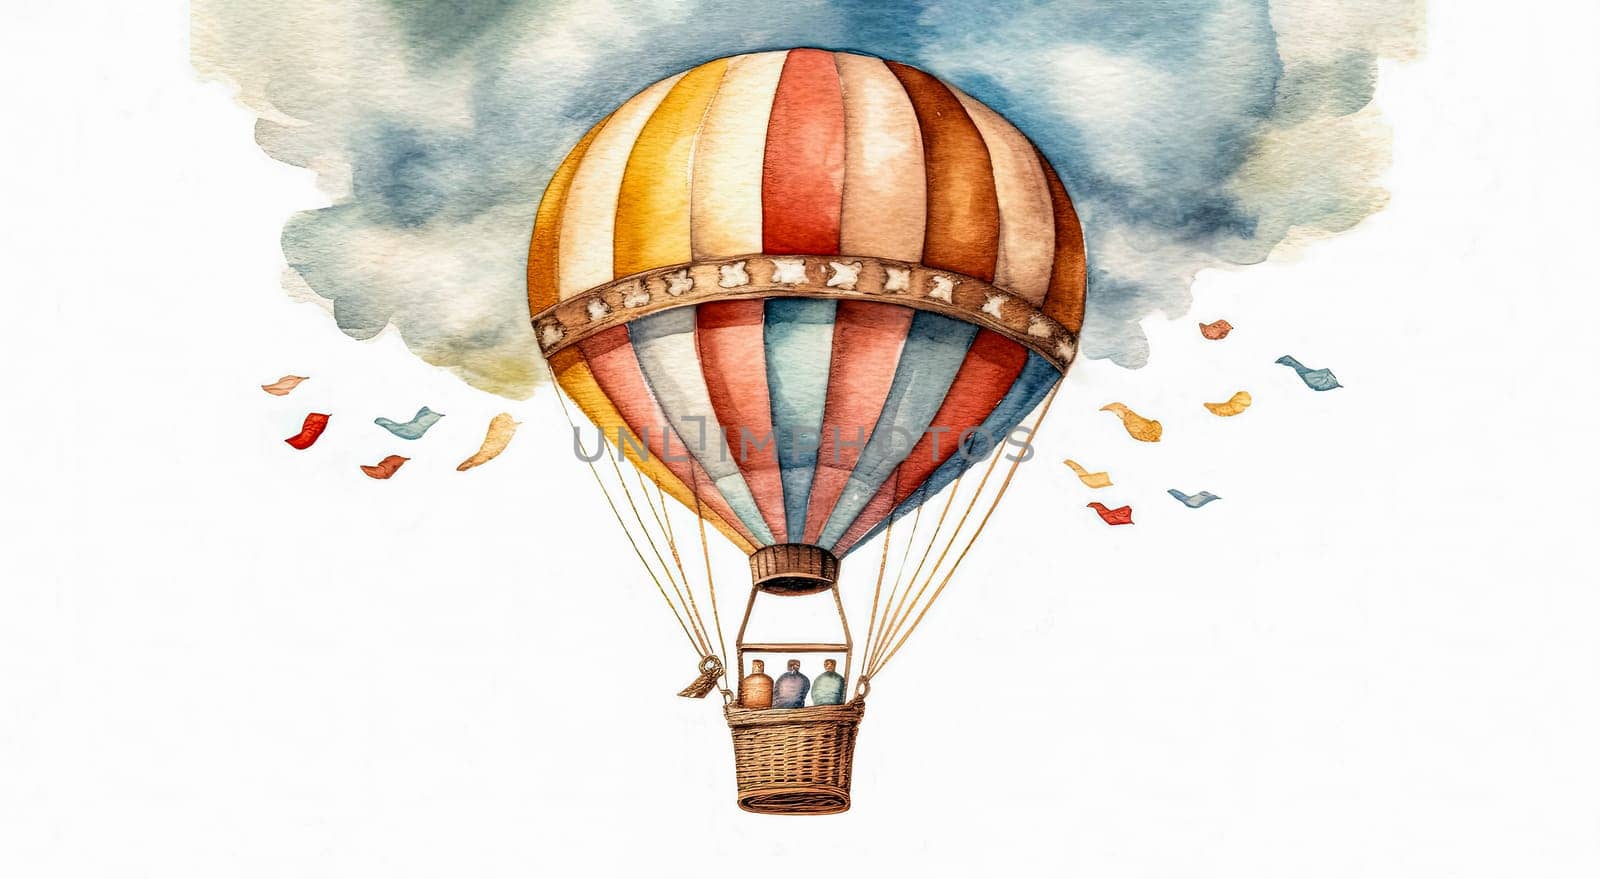 A colorful hot air balloon with people inside is flying through the sky by Alla_Morozova93